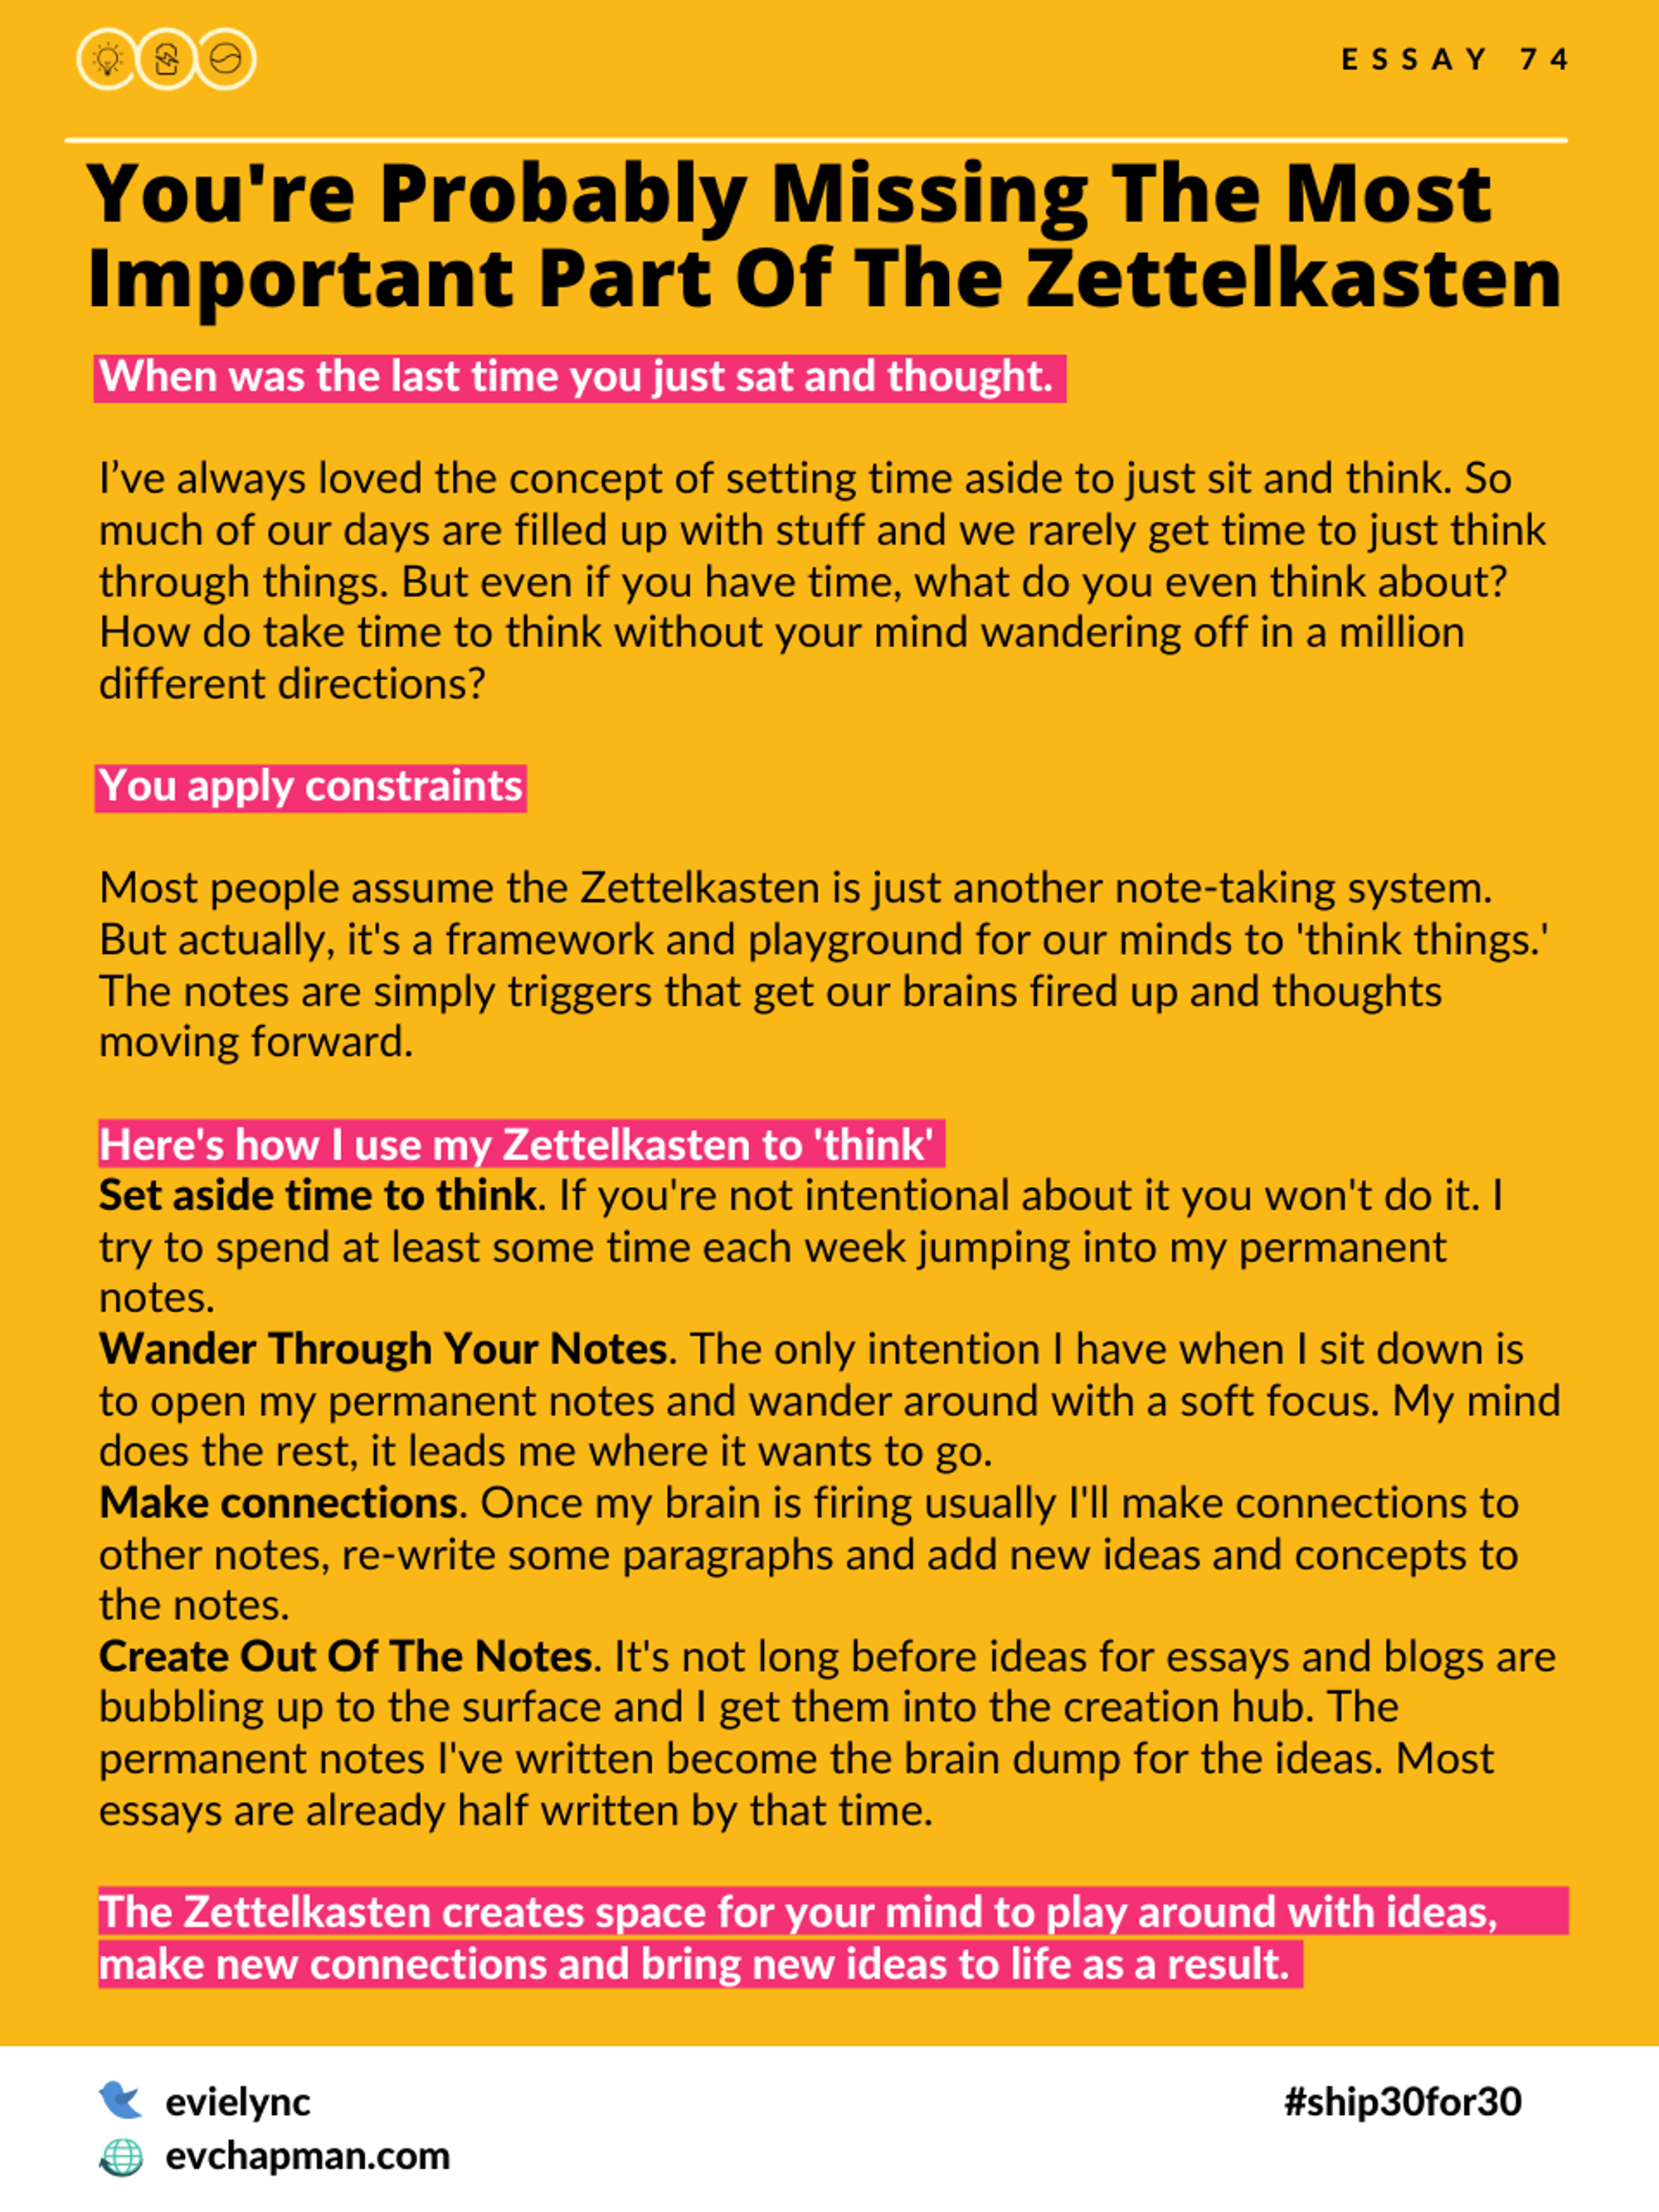 You're Probably Missing The Most Important Part Of The Zettelkasten